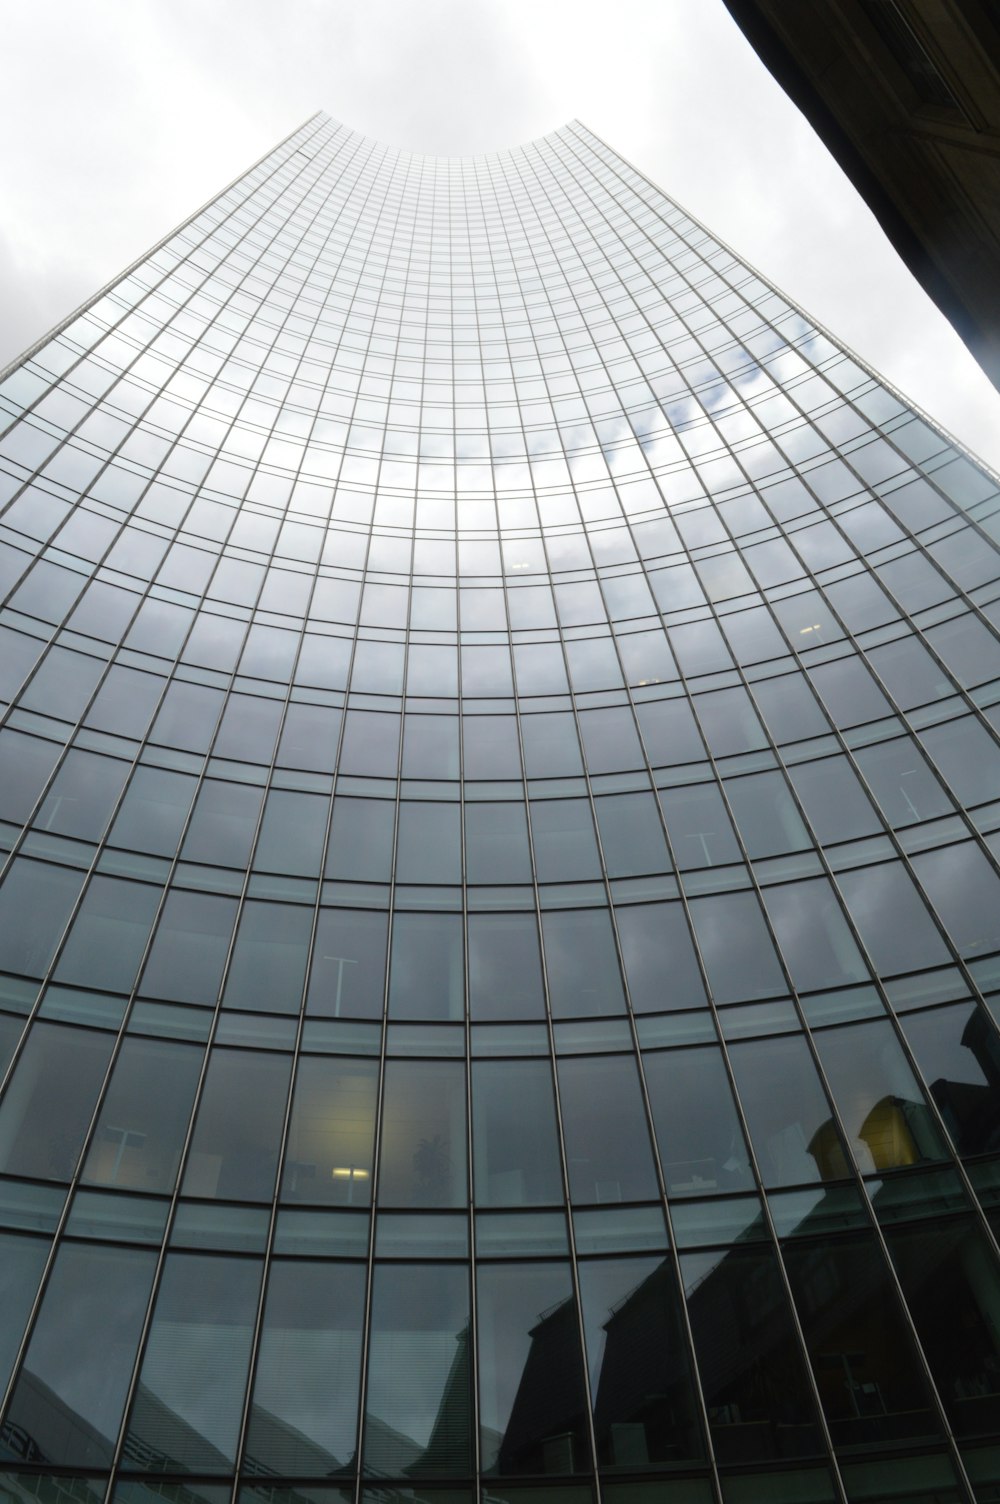 clear glass dome building during daytime